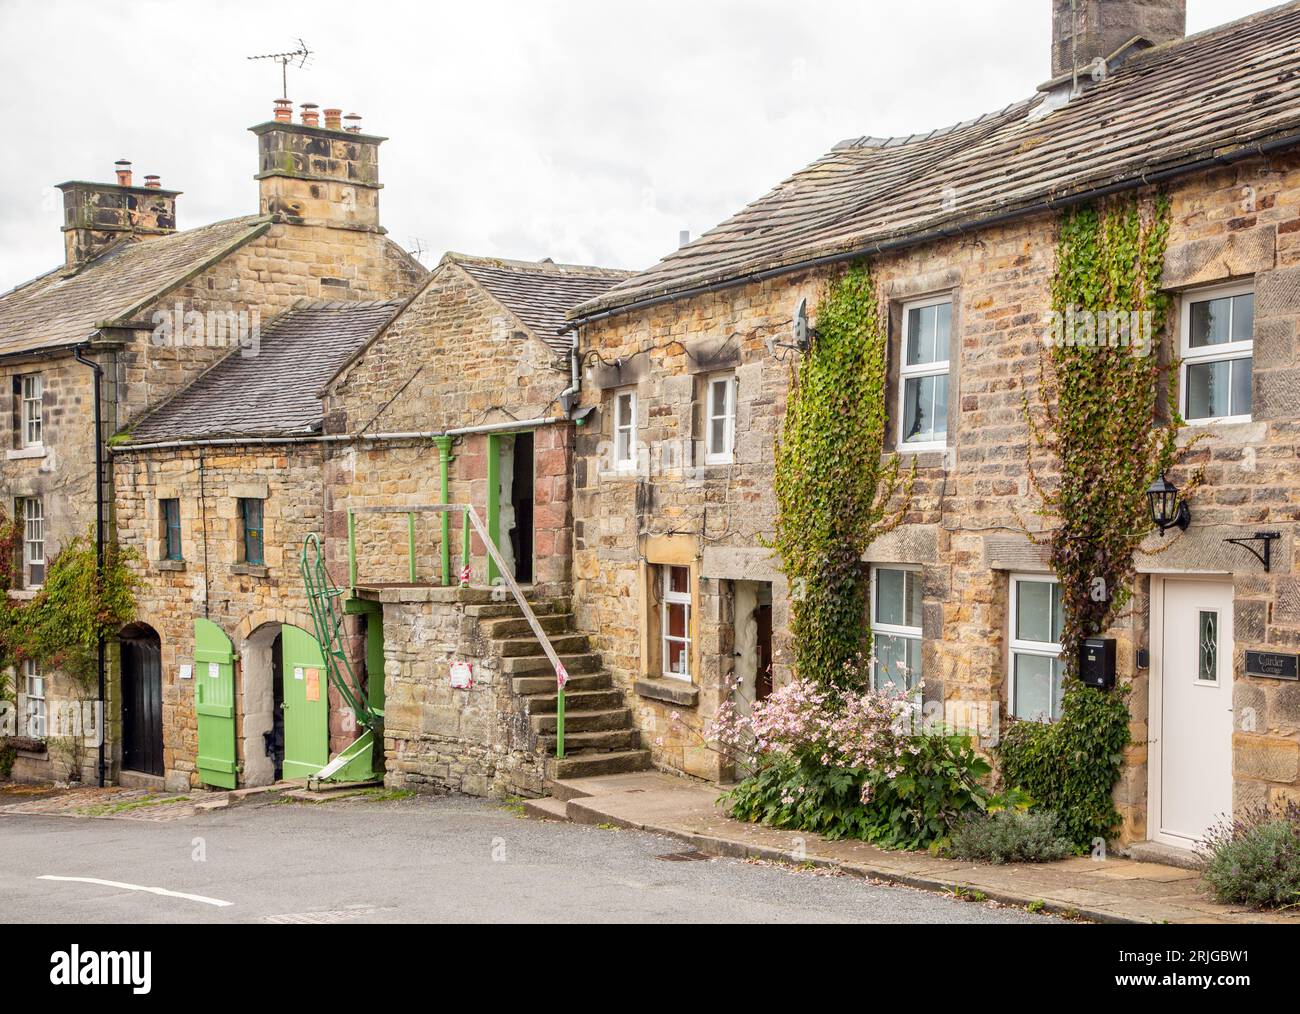 Traditional stone built country cottages in the North Staffordshire Peak District village of Longnor Stock Photo